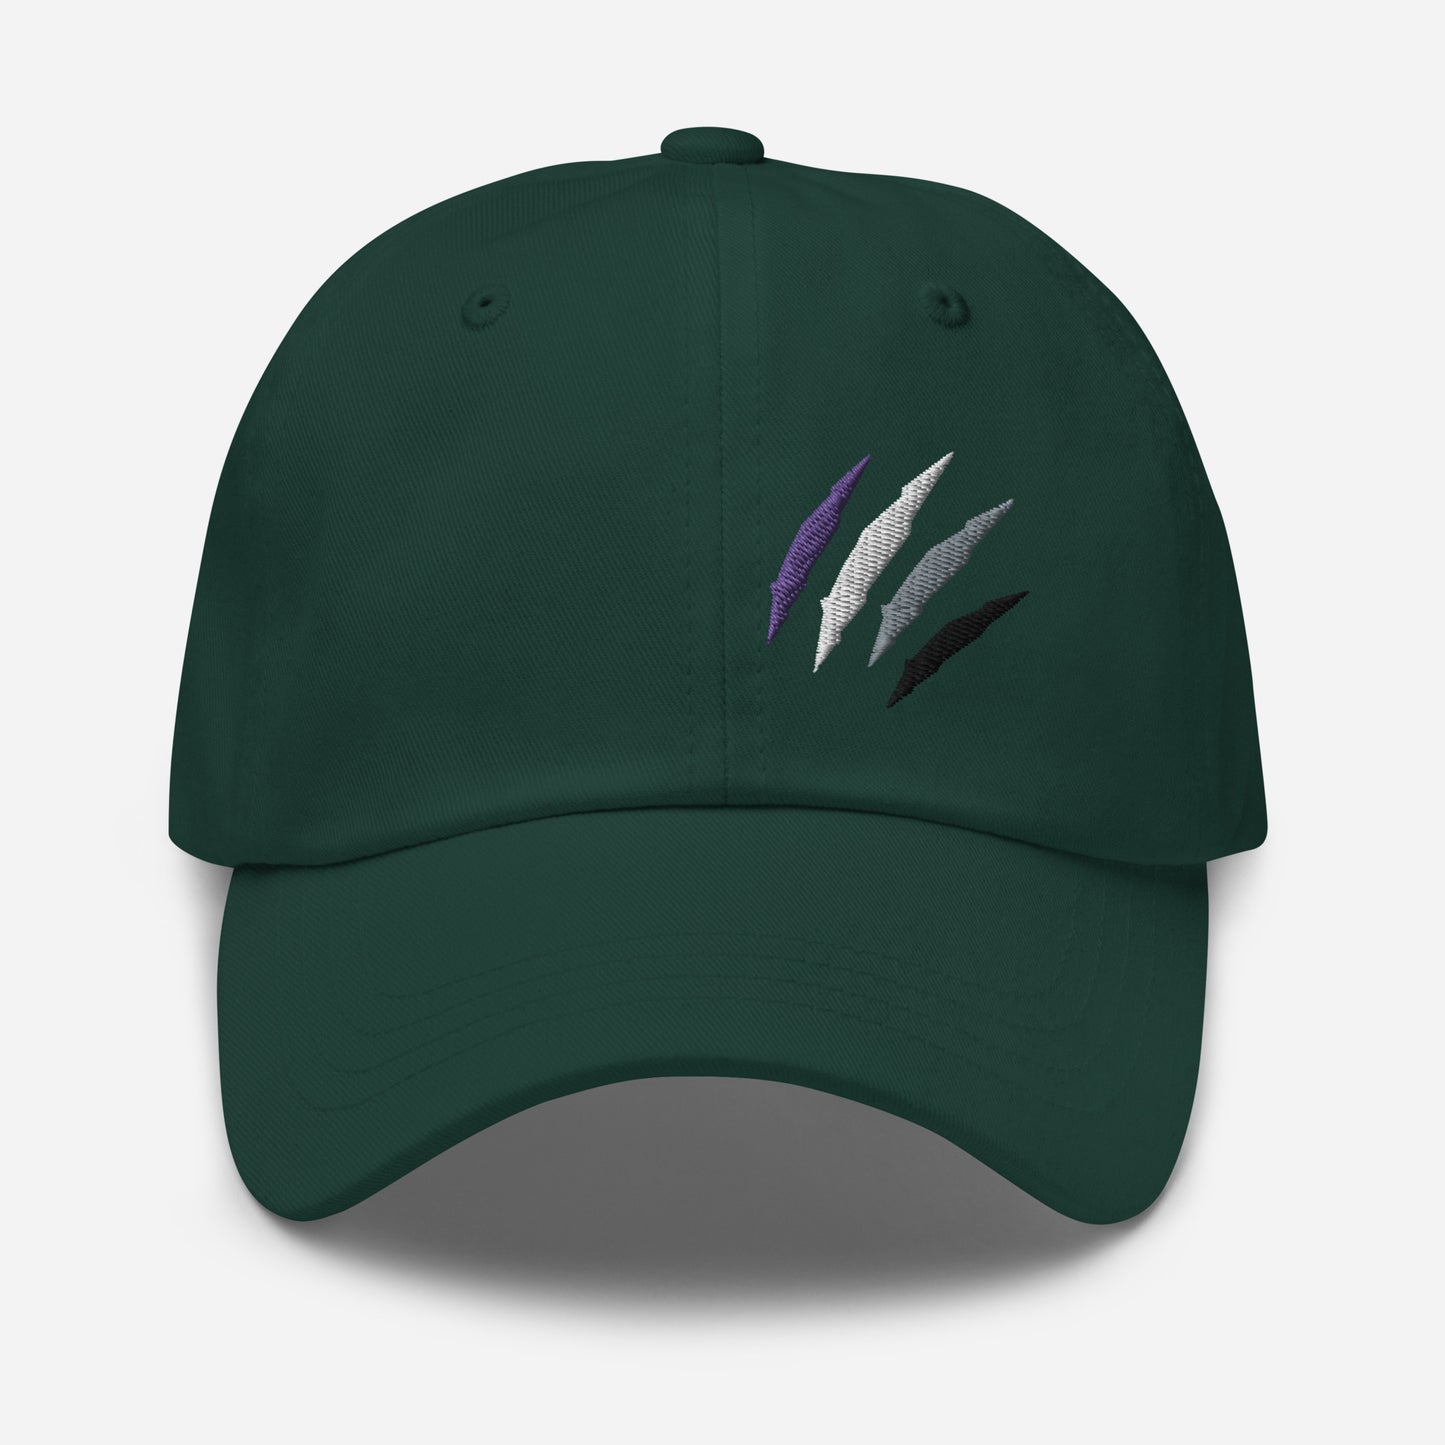 Baseball hat featuring asexual pride scratch mark embroidery in spruce with a low profile, adjustable strap.